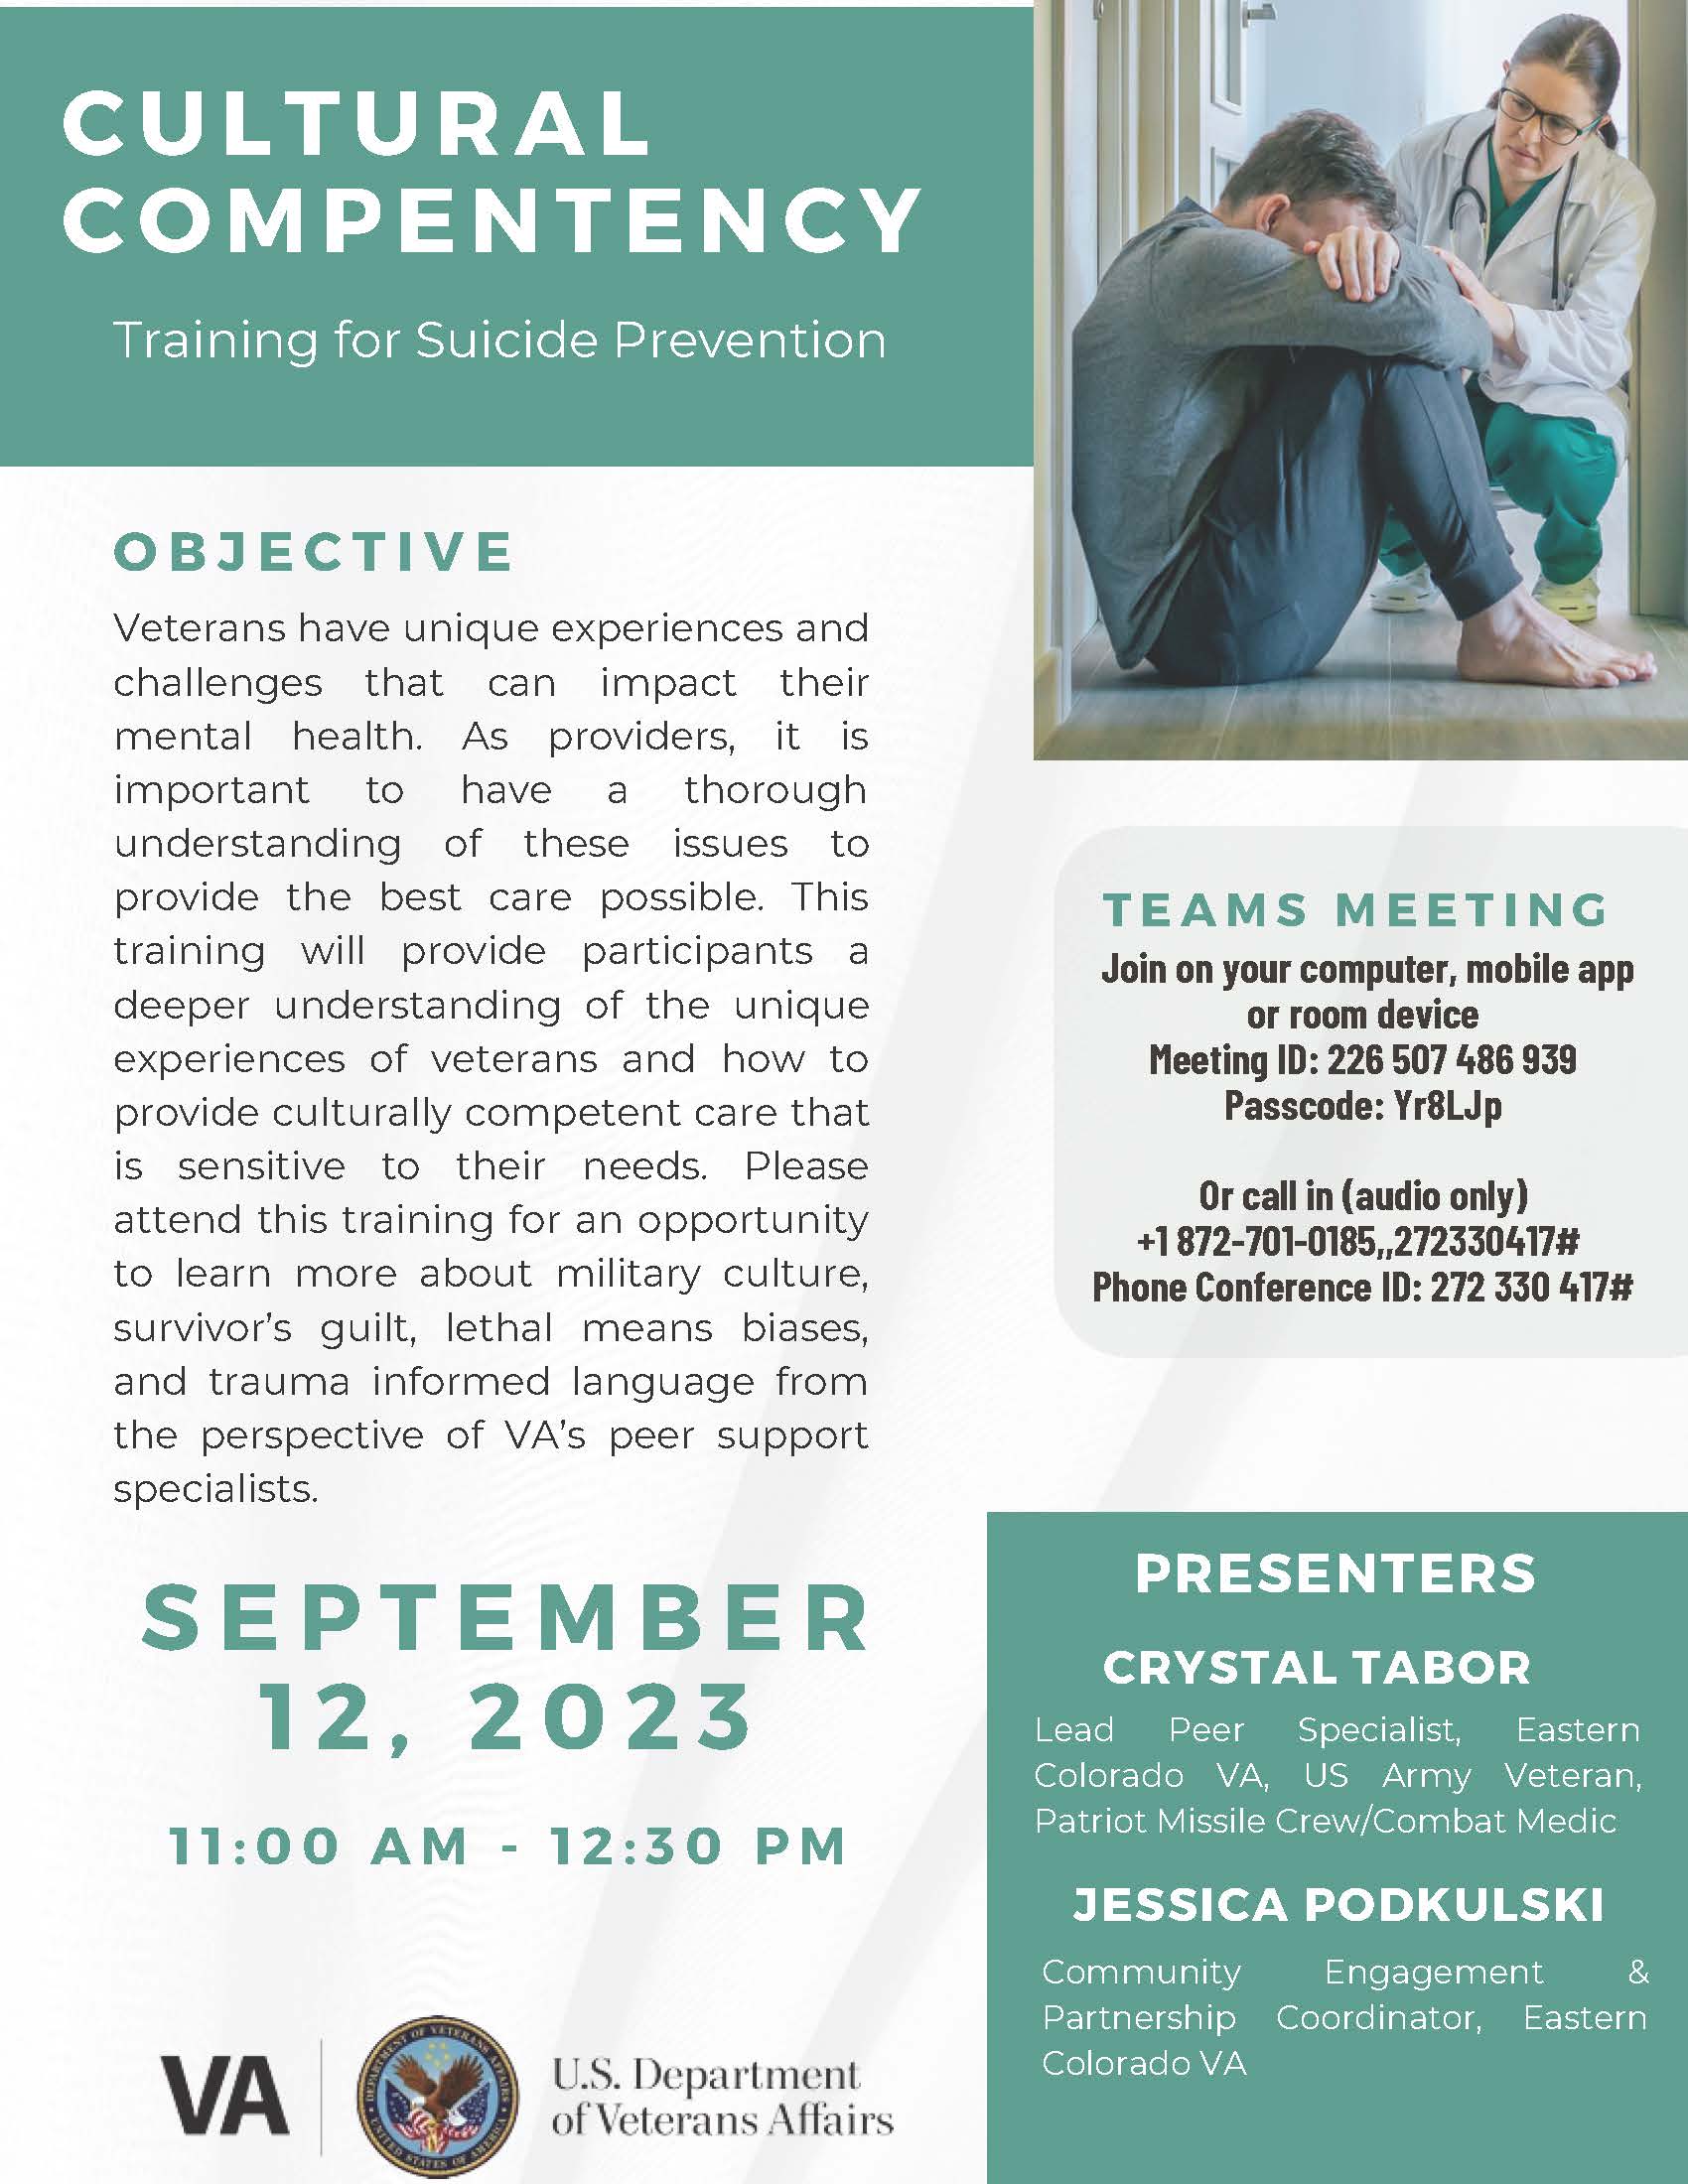 Cultural Competency Training for Suicide Prevention flyer